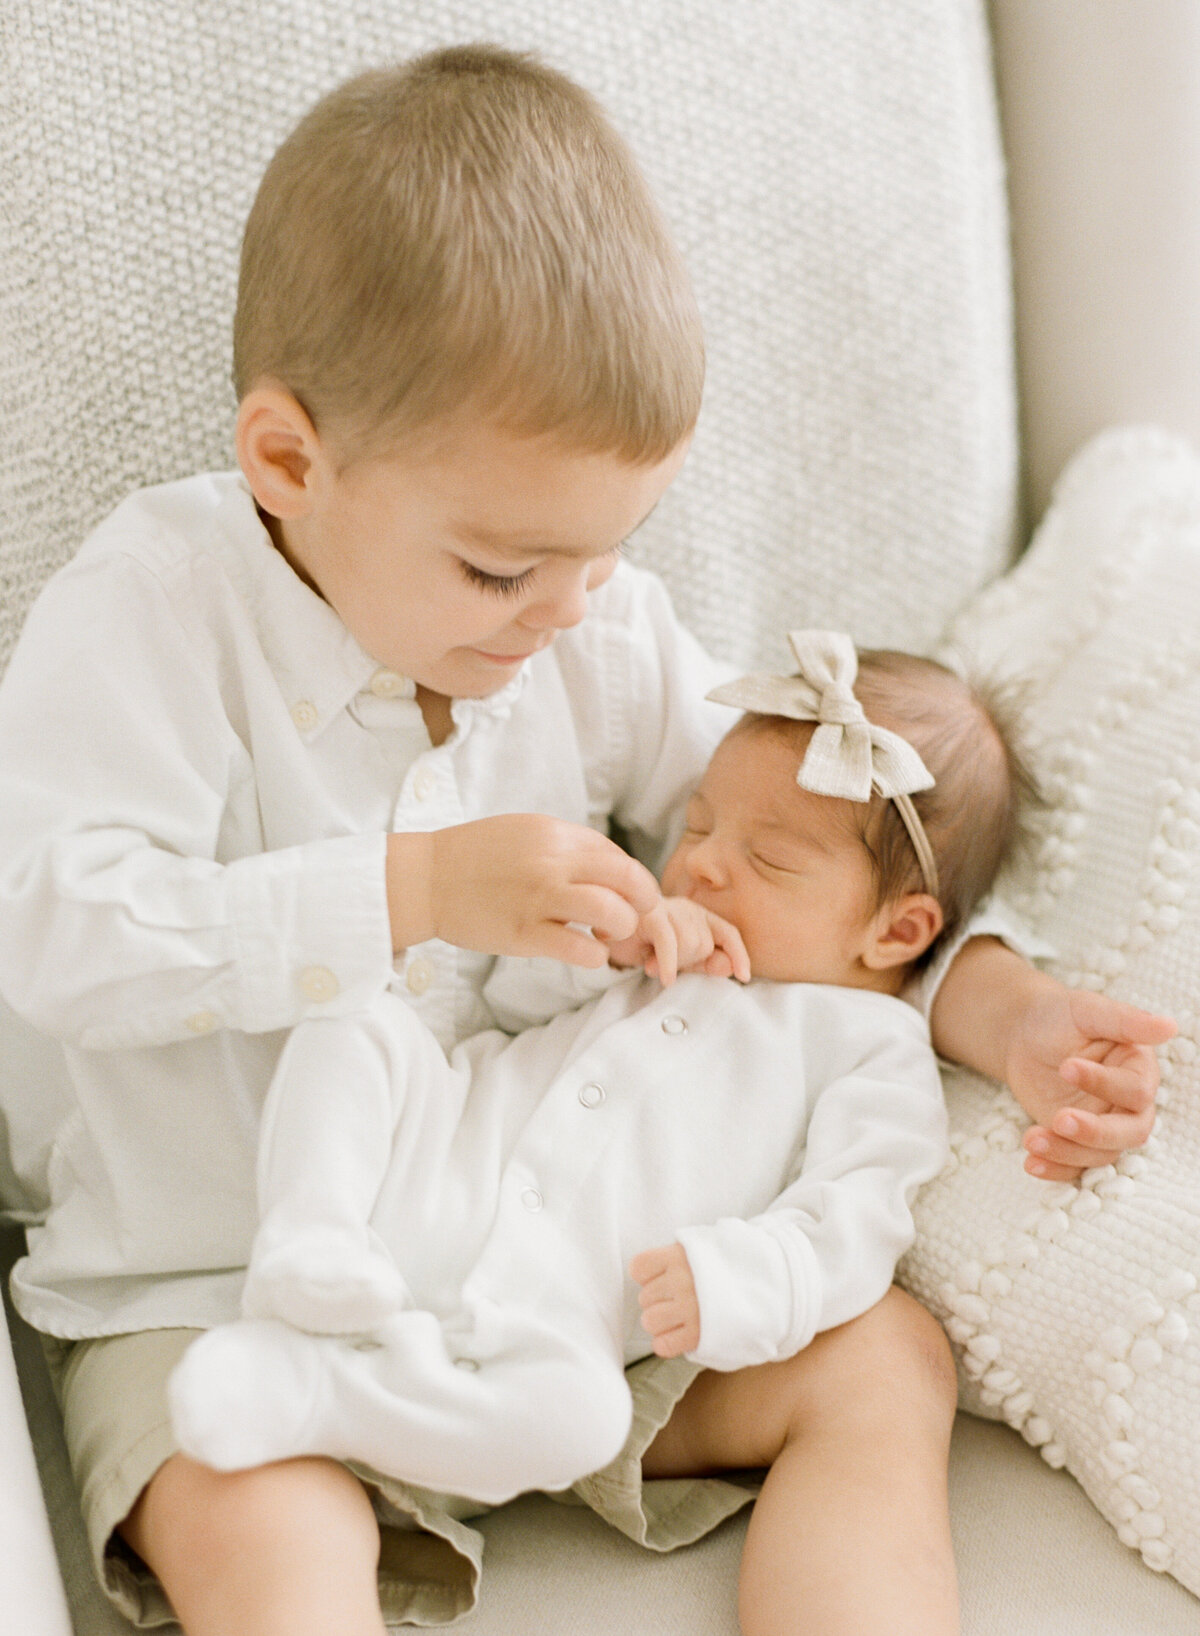 Big brother holds baby sister's fingers during a newborn photo session in Raleigh. Photographed by newborn photographer Raleigh A.J. Dunlap Photography.